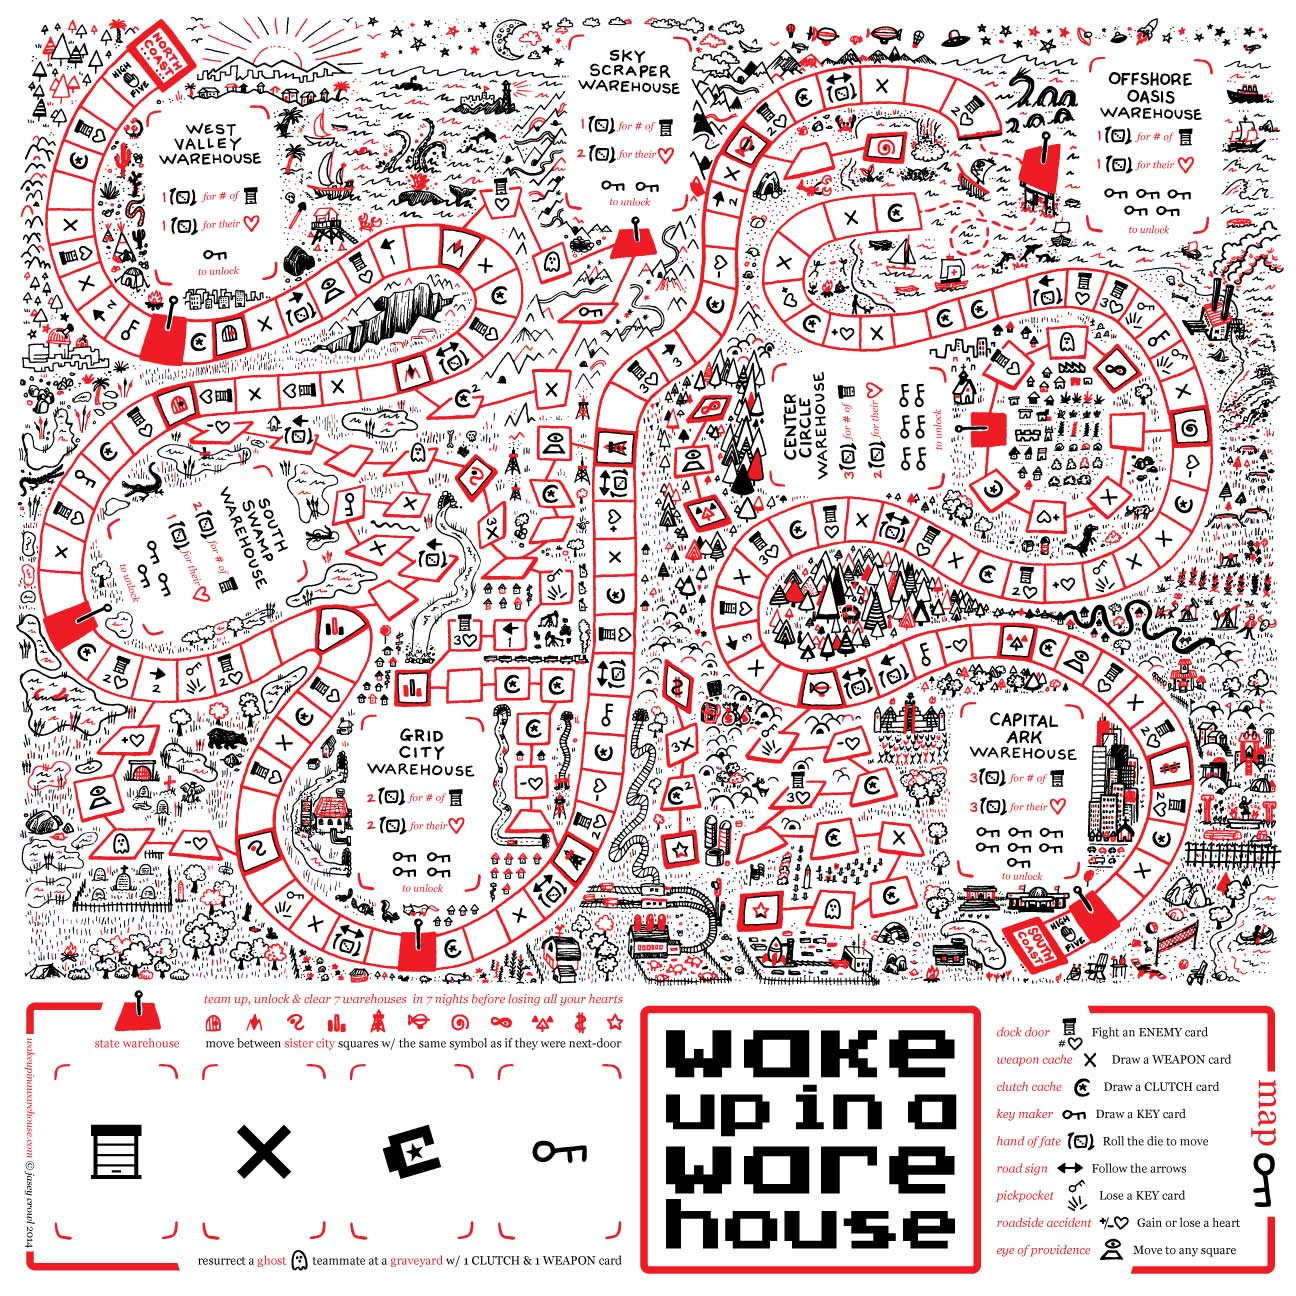 WUIAW & StN - Wake Up In A Warehouse & Survive the Night Gameboard - Jasey Crowl Draws